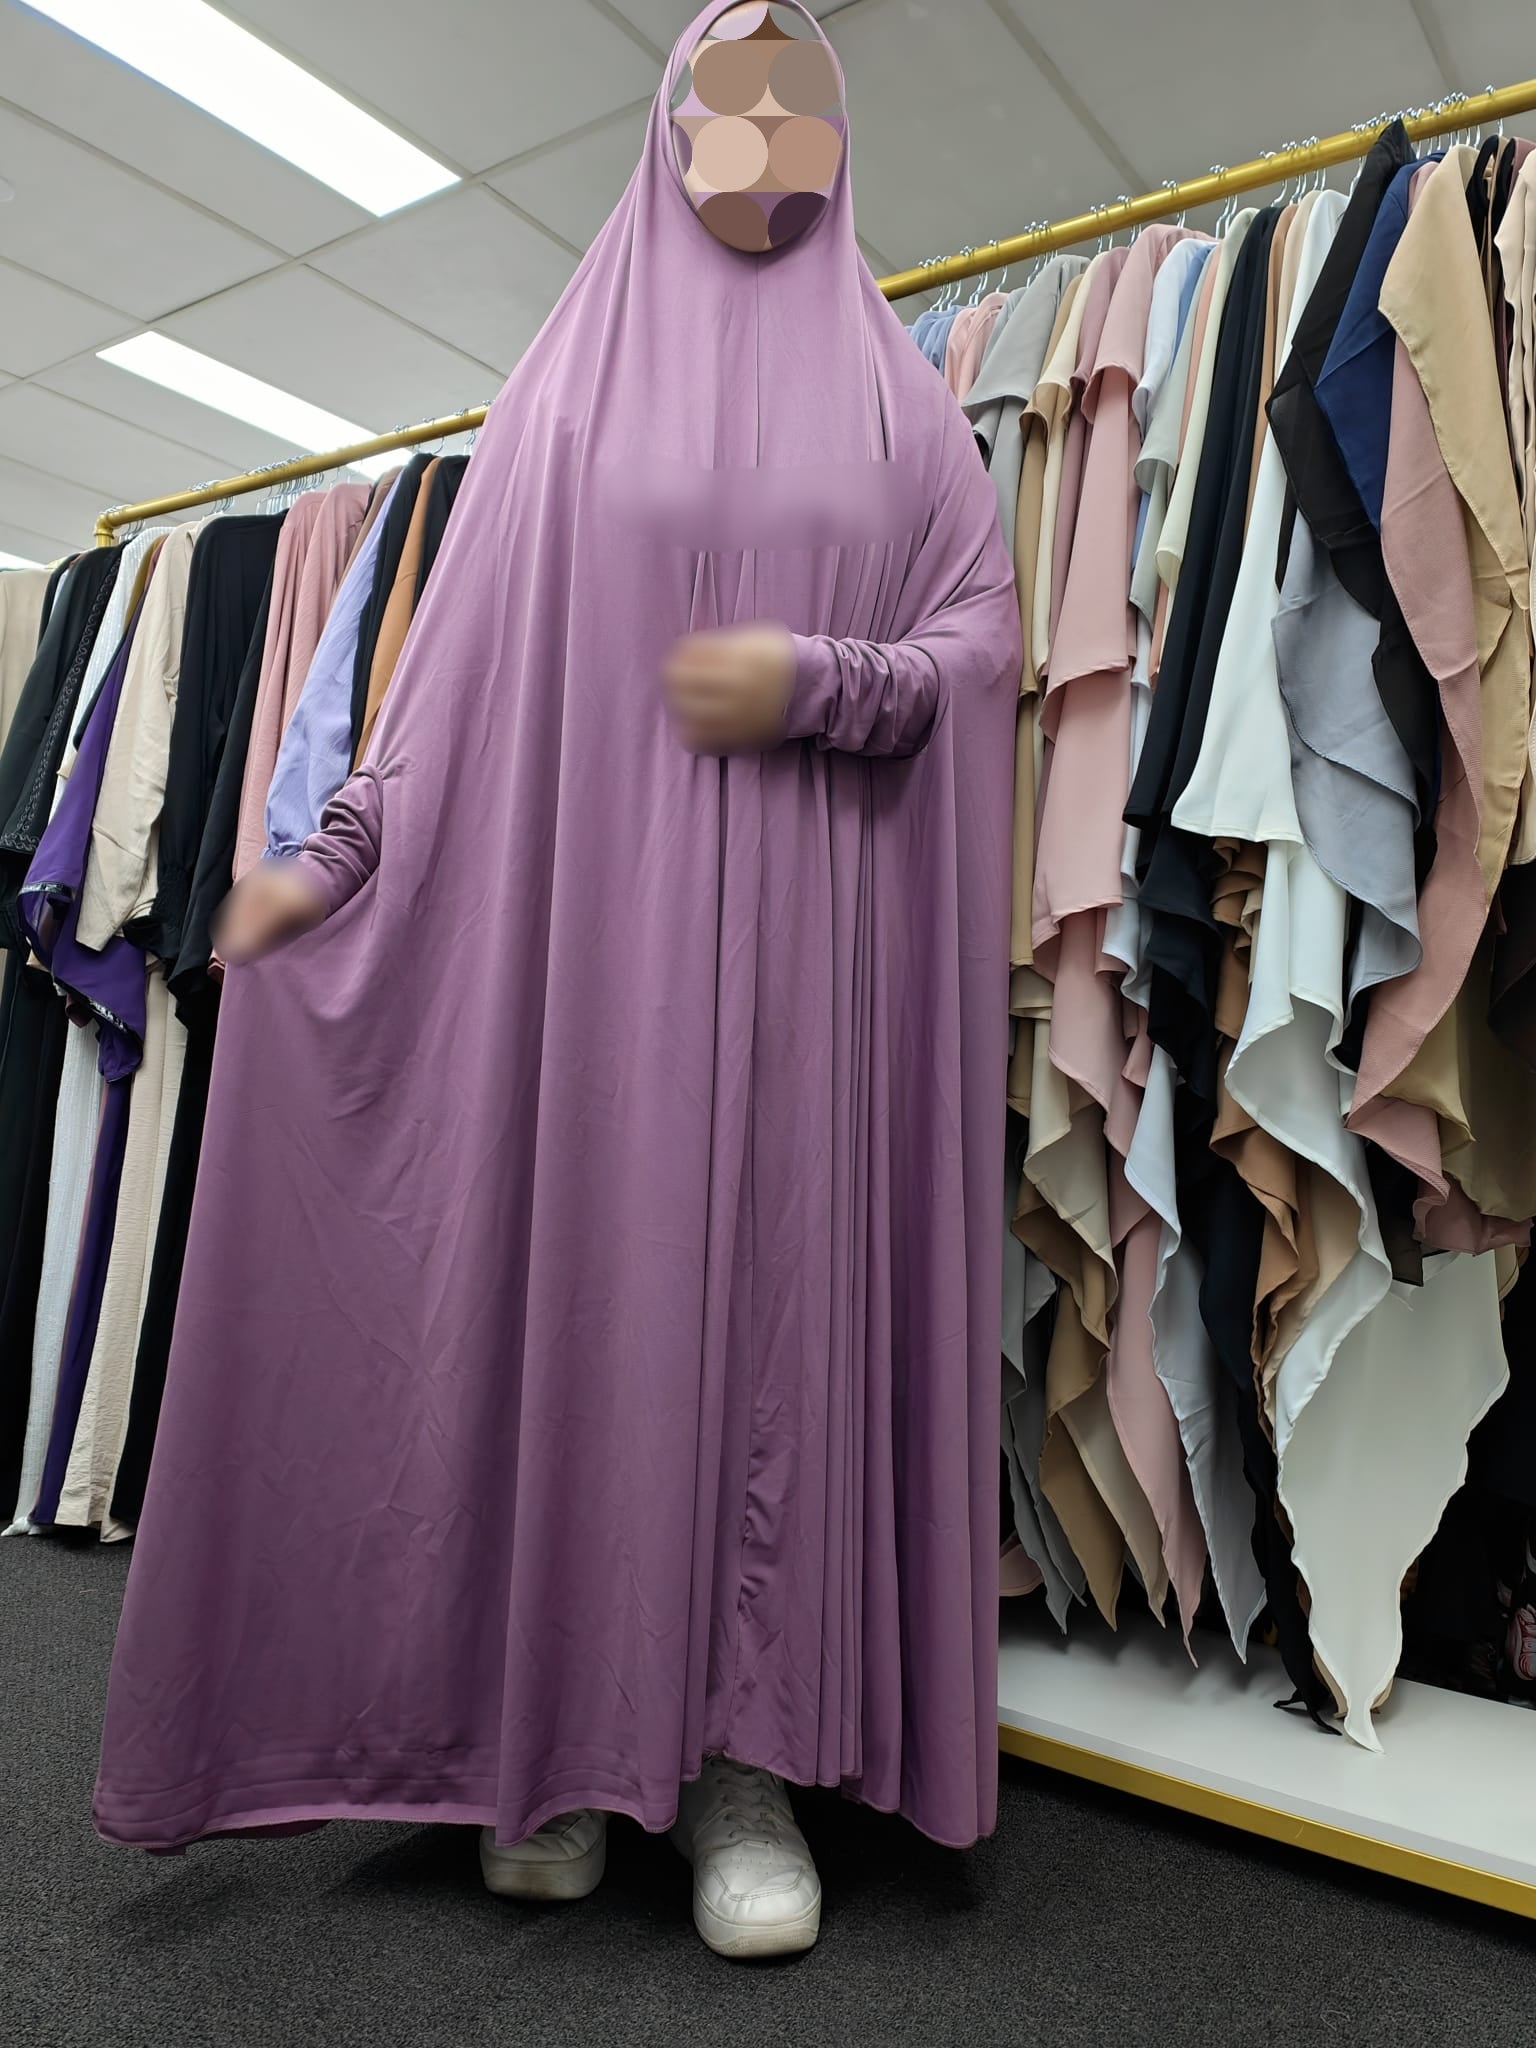 Discover elegance and comfort with our exclusive Premium Lavender Jilbab, crafted from premium ITY Knit fabric for a luxurious feel. Embrace the perfect blend of style and modesty in this smooth, soft, and non-see-through ankle-length jilbab, available at a reasonable price only at Hikmah Boutique.